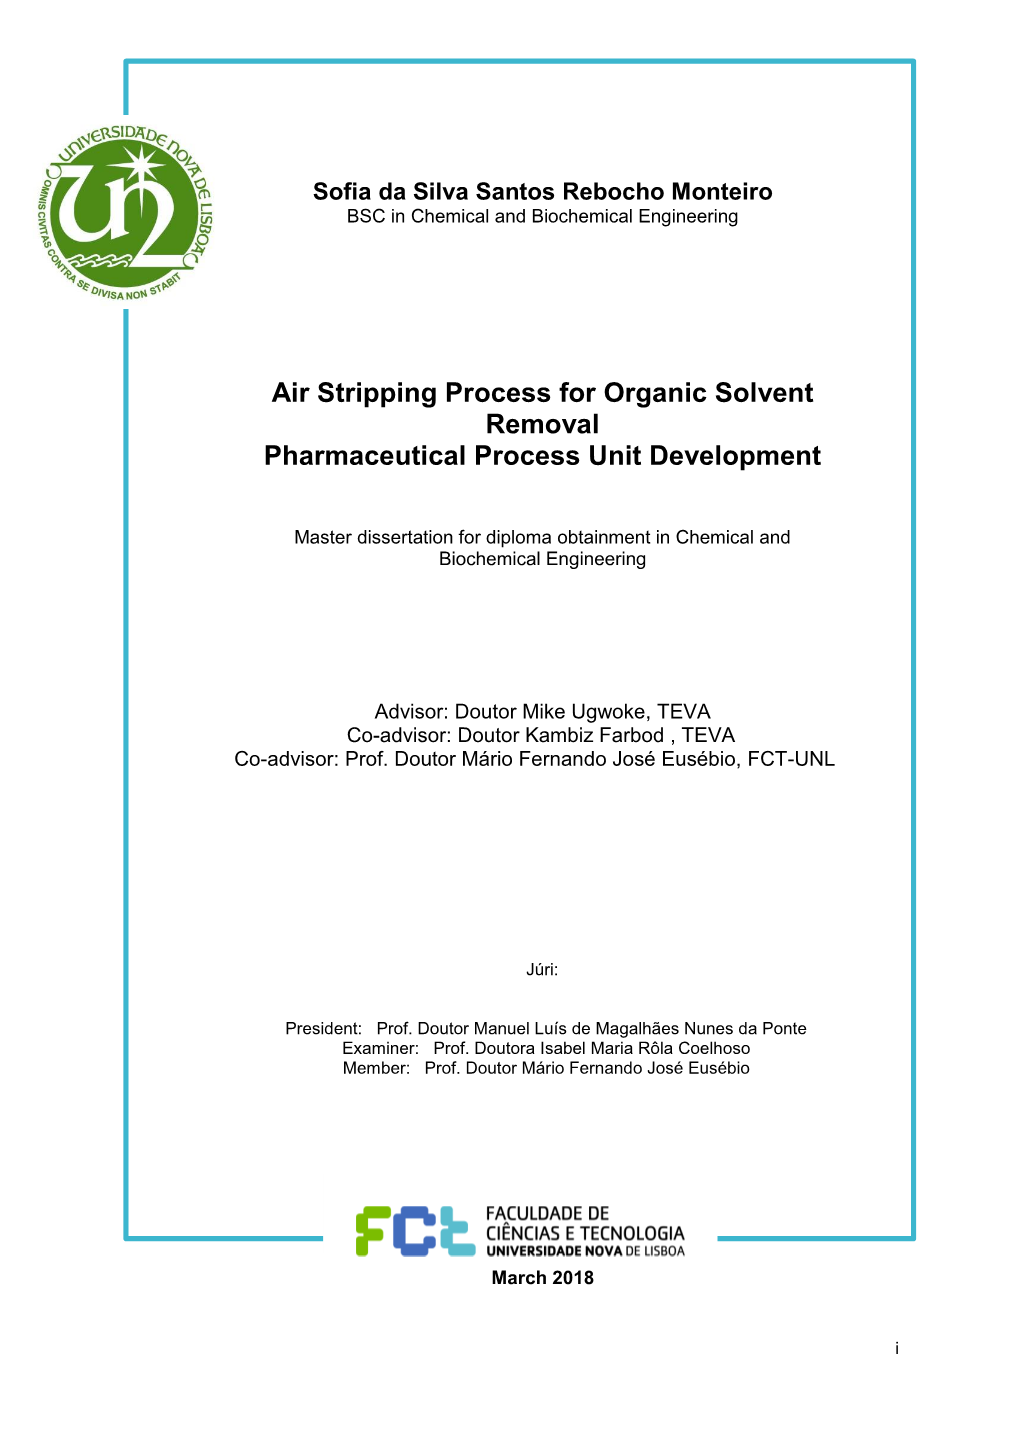 Air Stripping Process for Organic Solvent Removal Pharmaceutical Process Unit Development